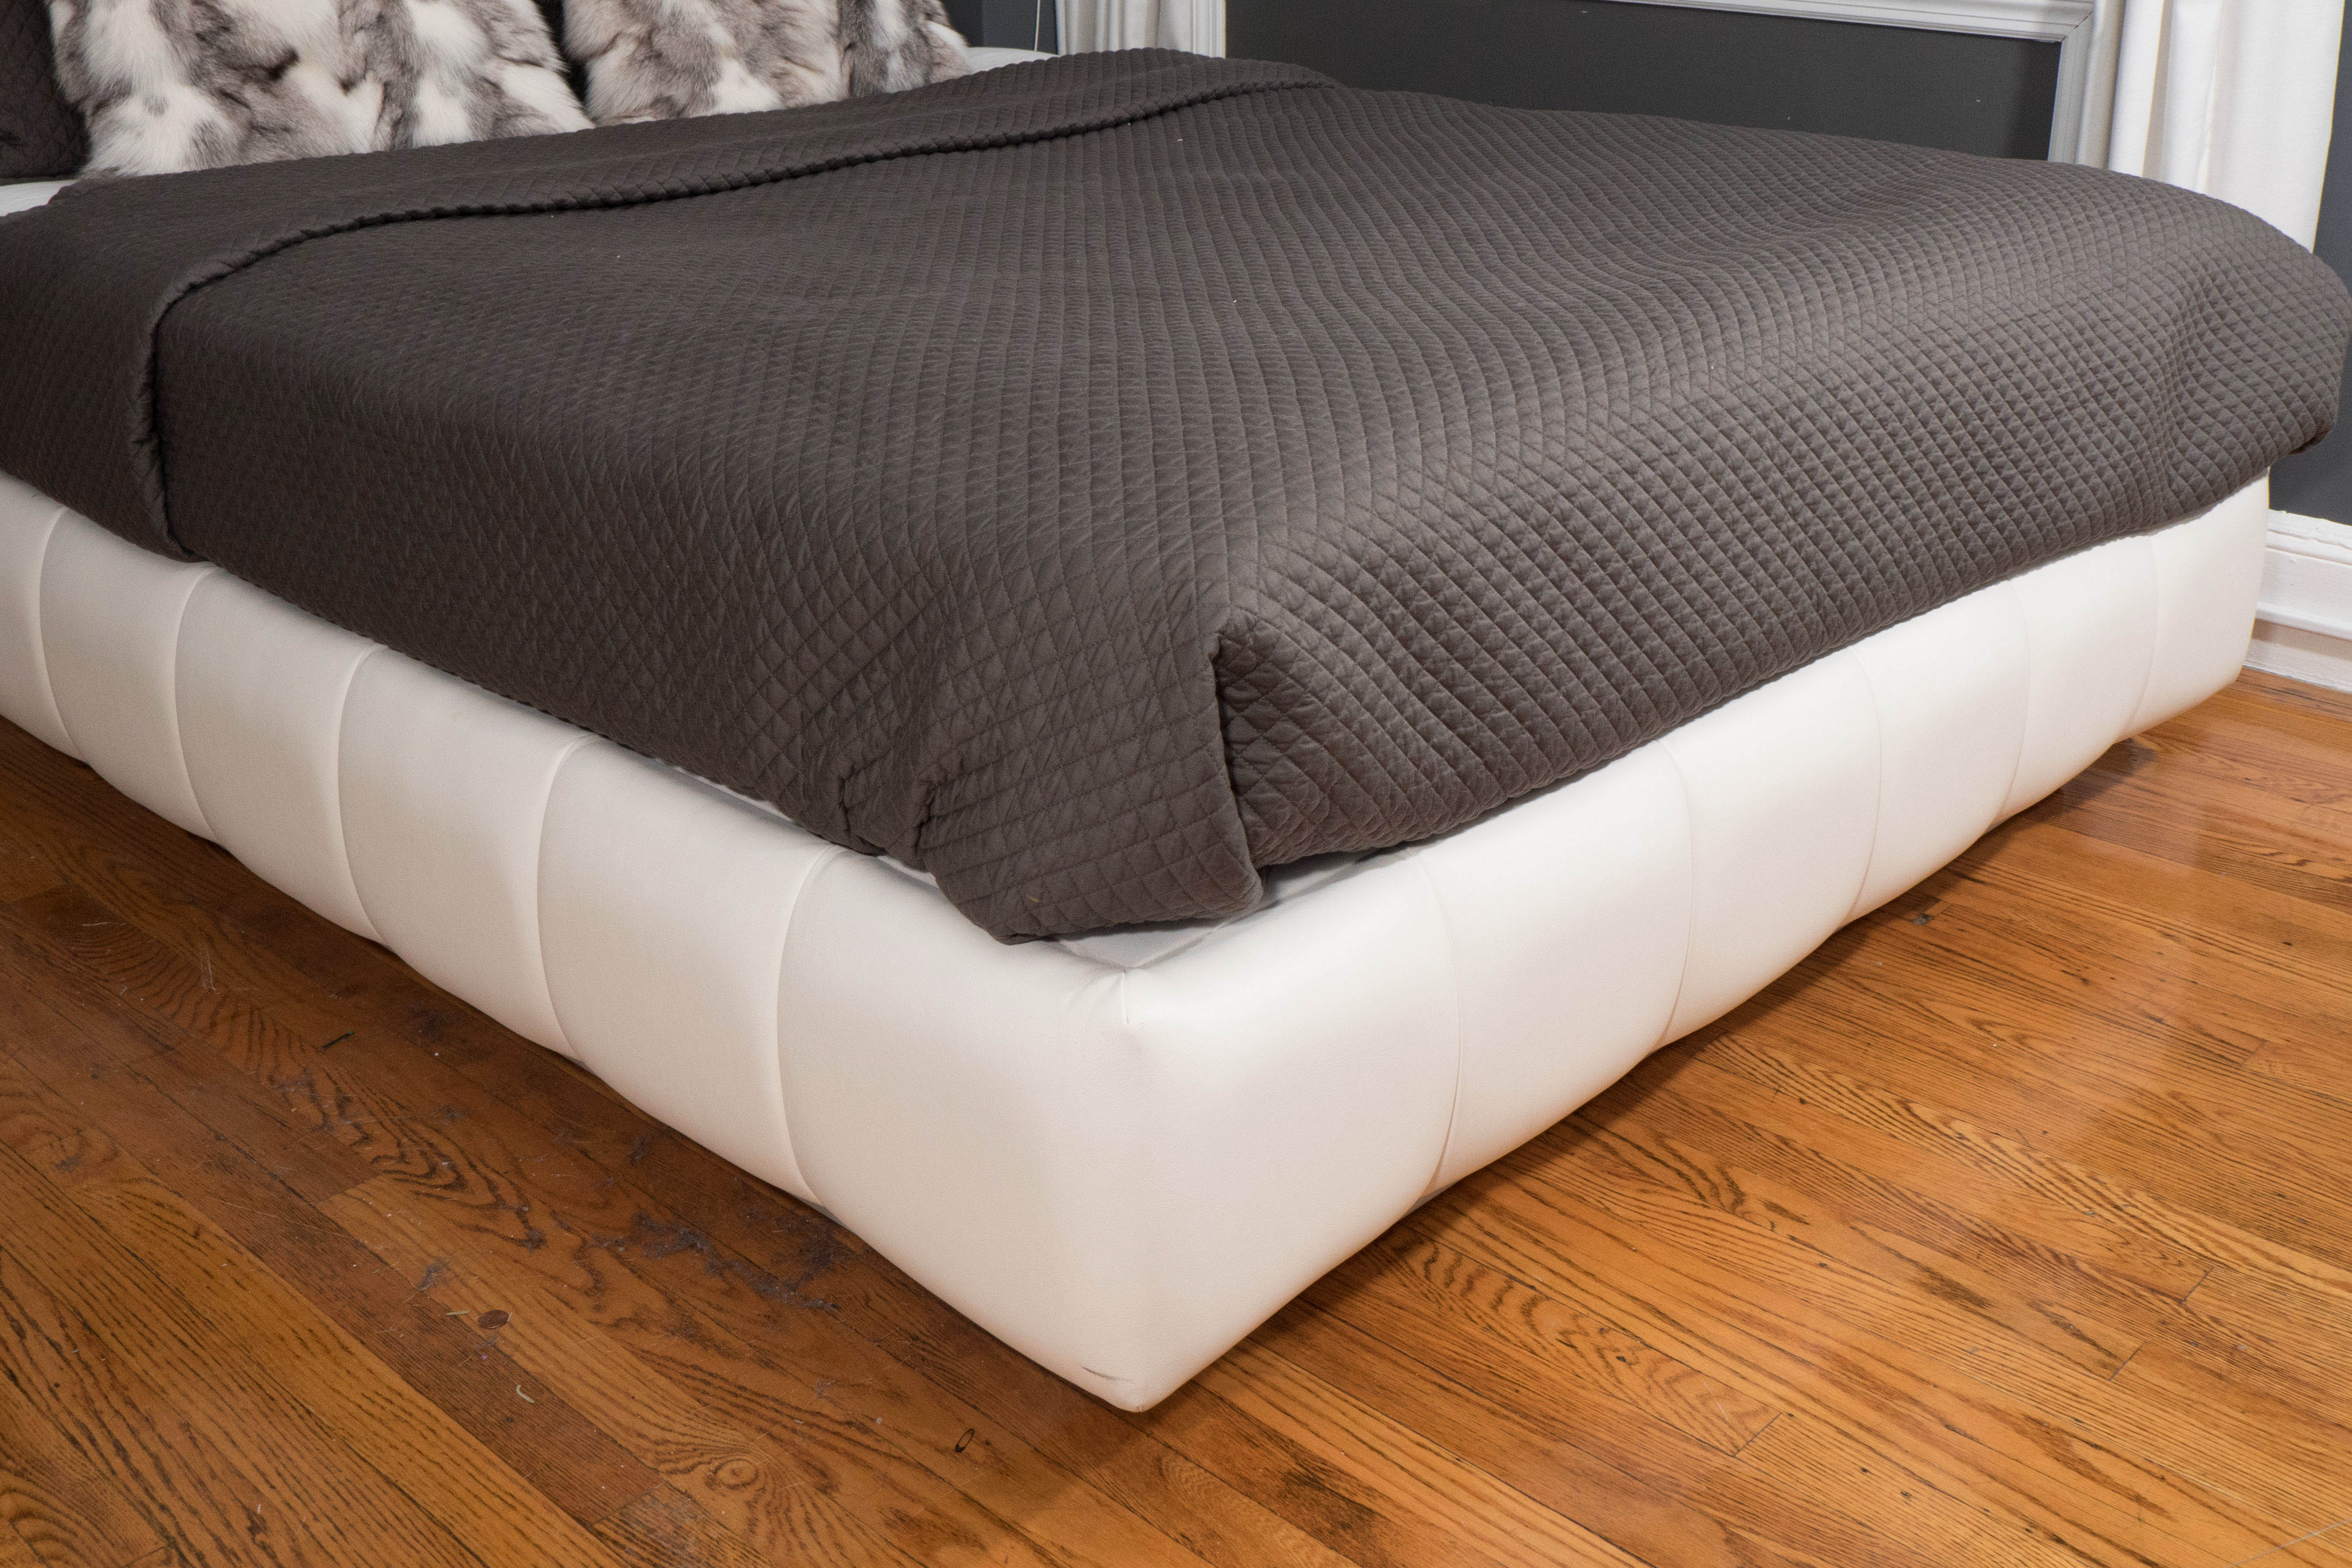 Queen-size white faux leather channel back bed.